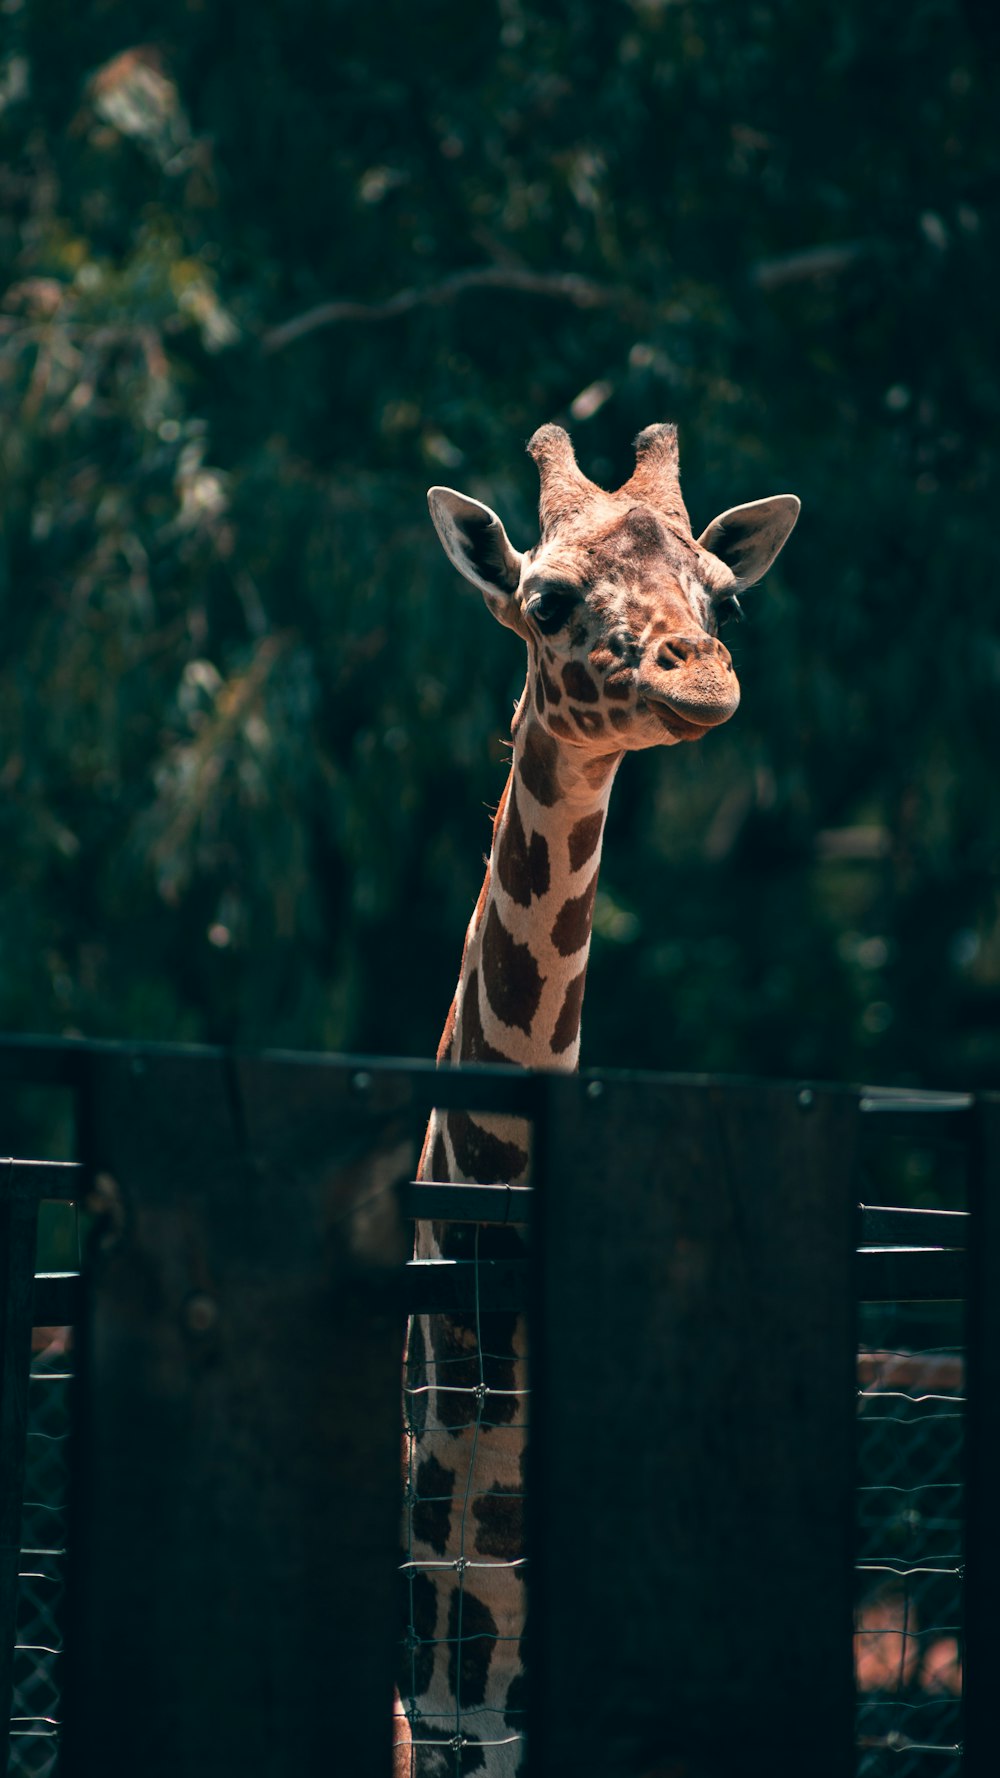 a giraffe looking over a fence at the camera